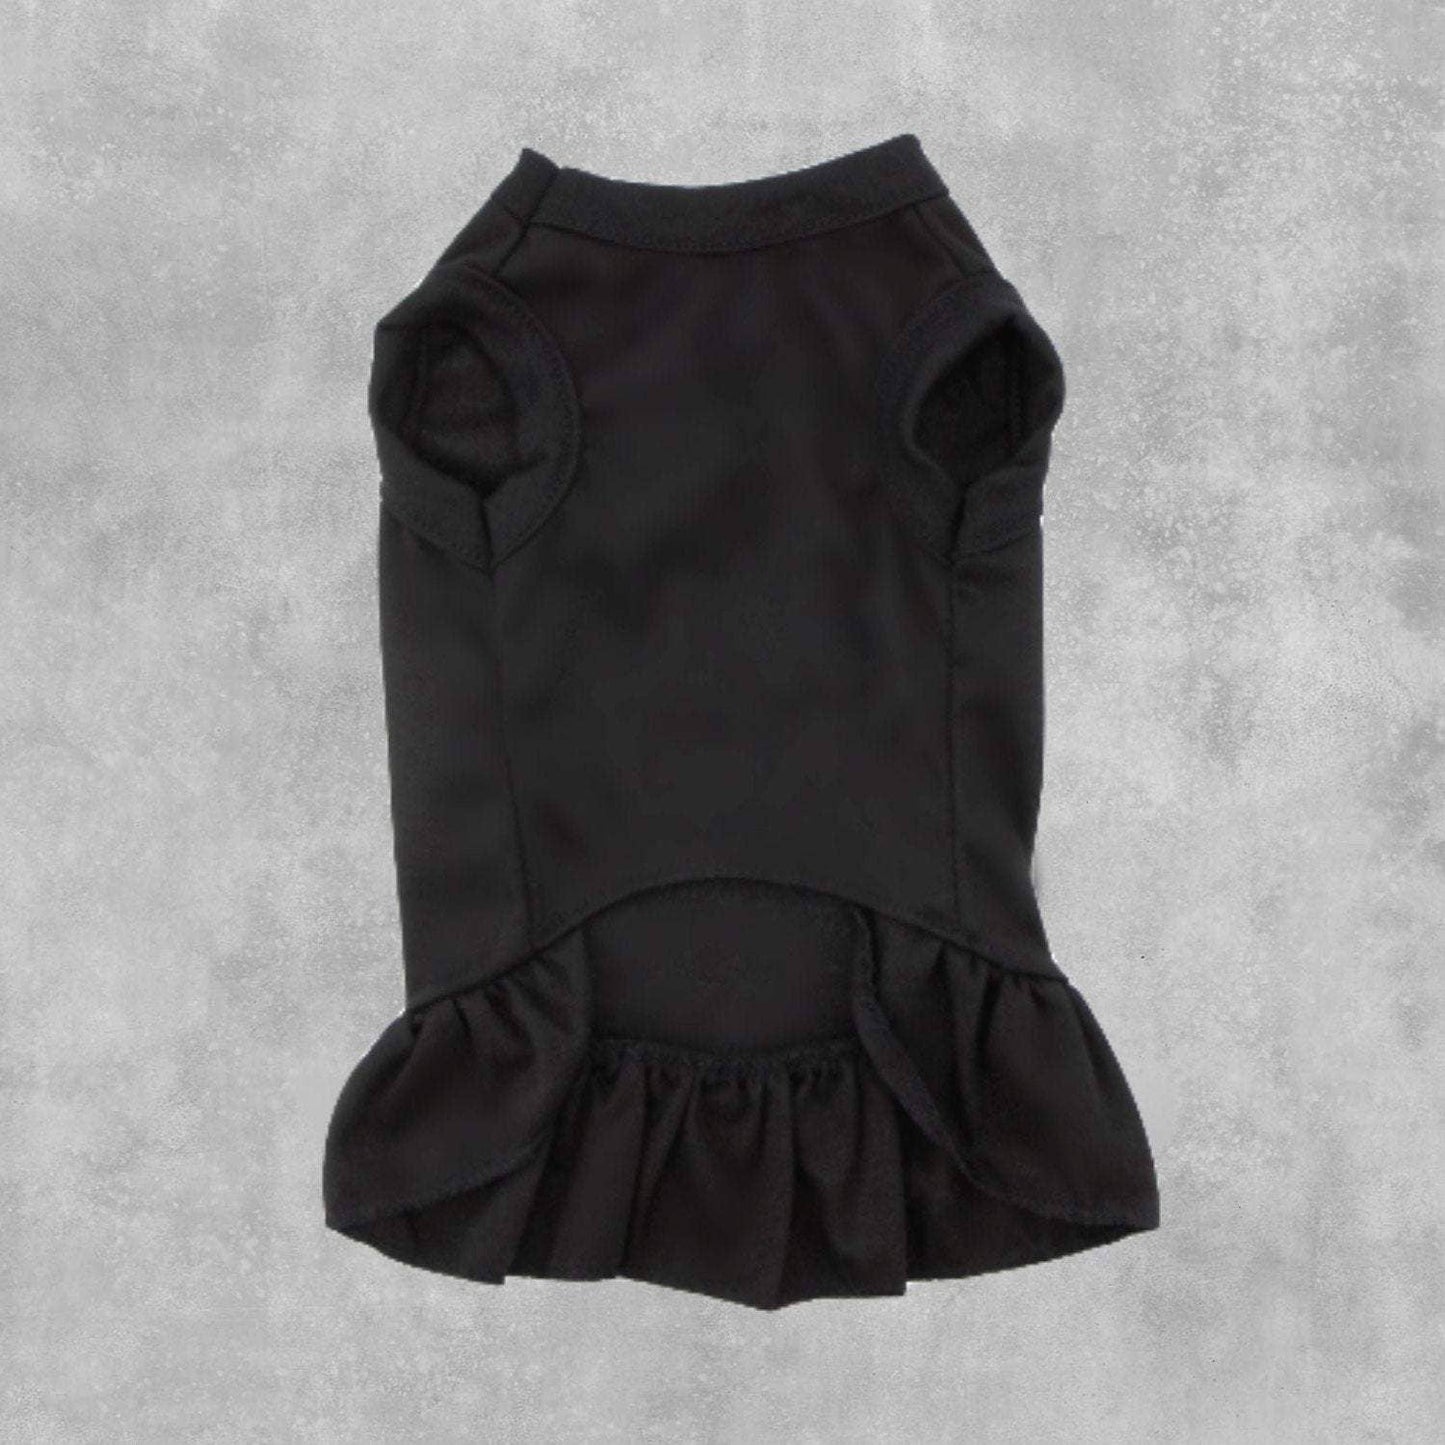 Don't Let The Pretty Bow Fool You Dog Dress: Large / Black